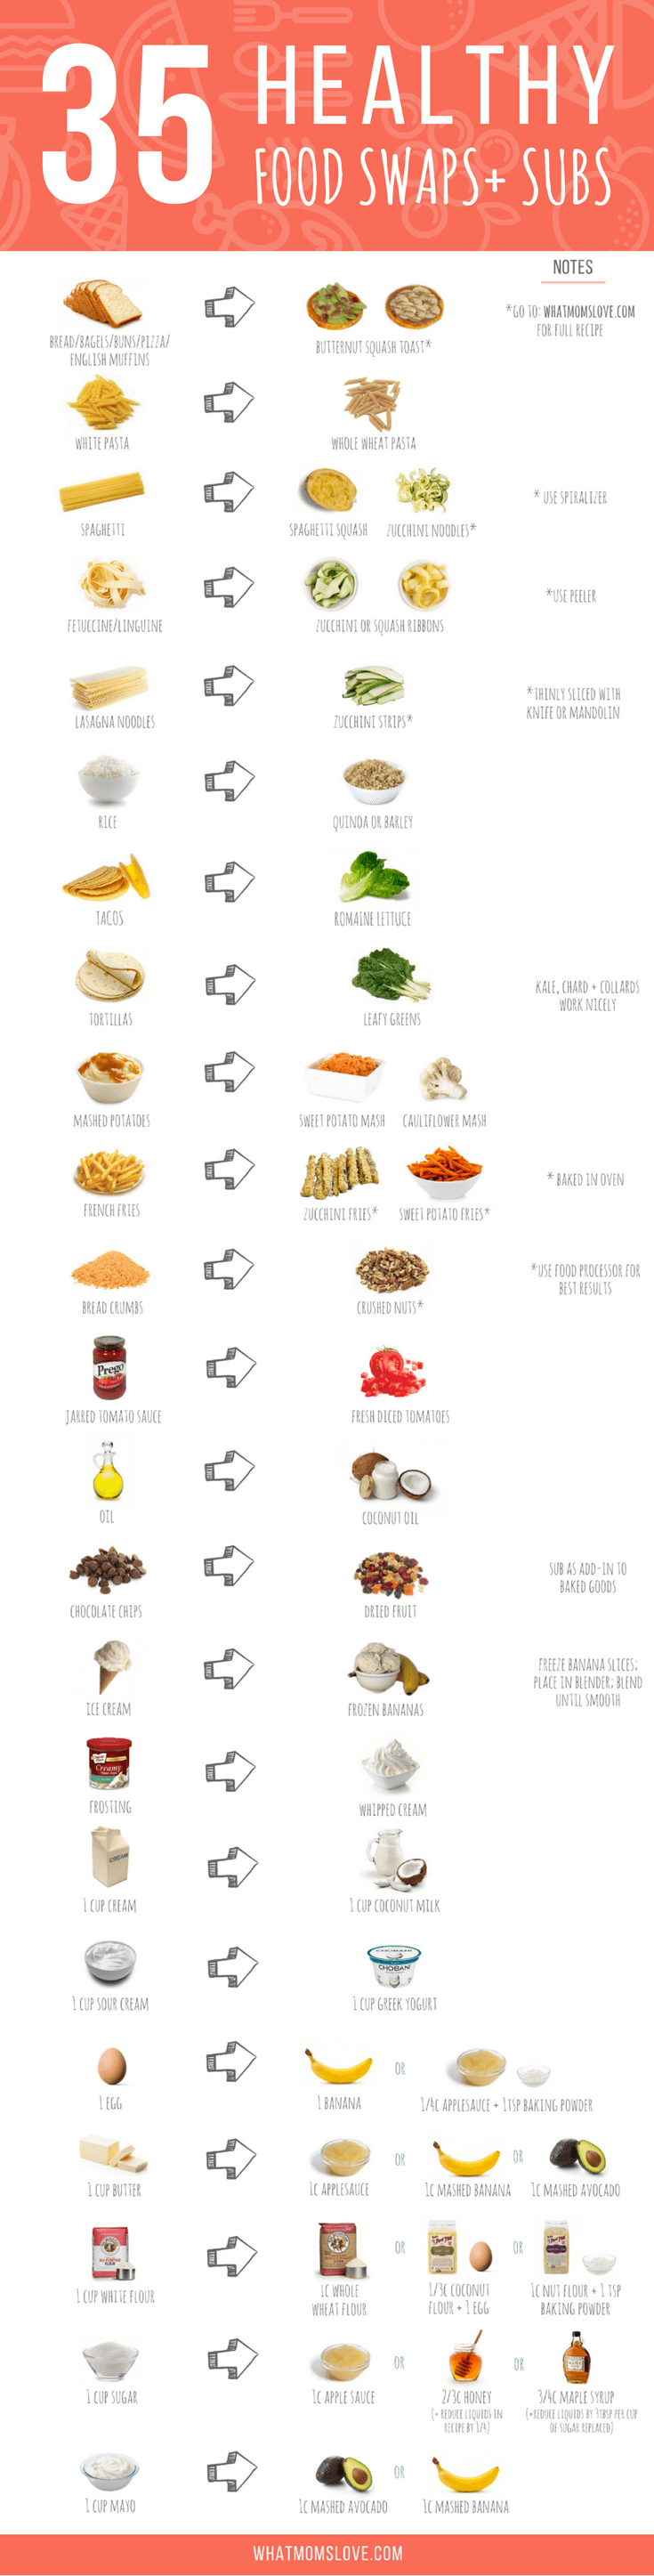 Quick and low-cost food substitutes